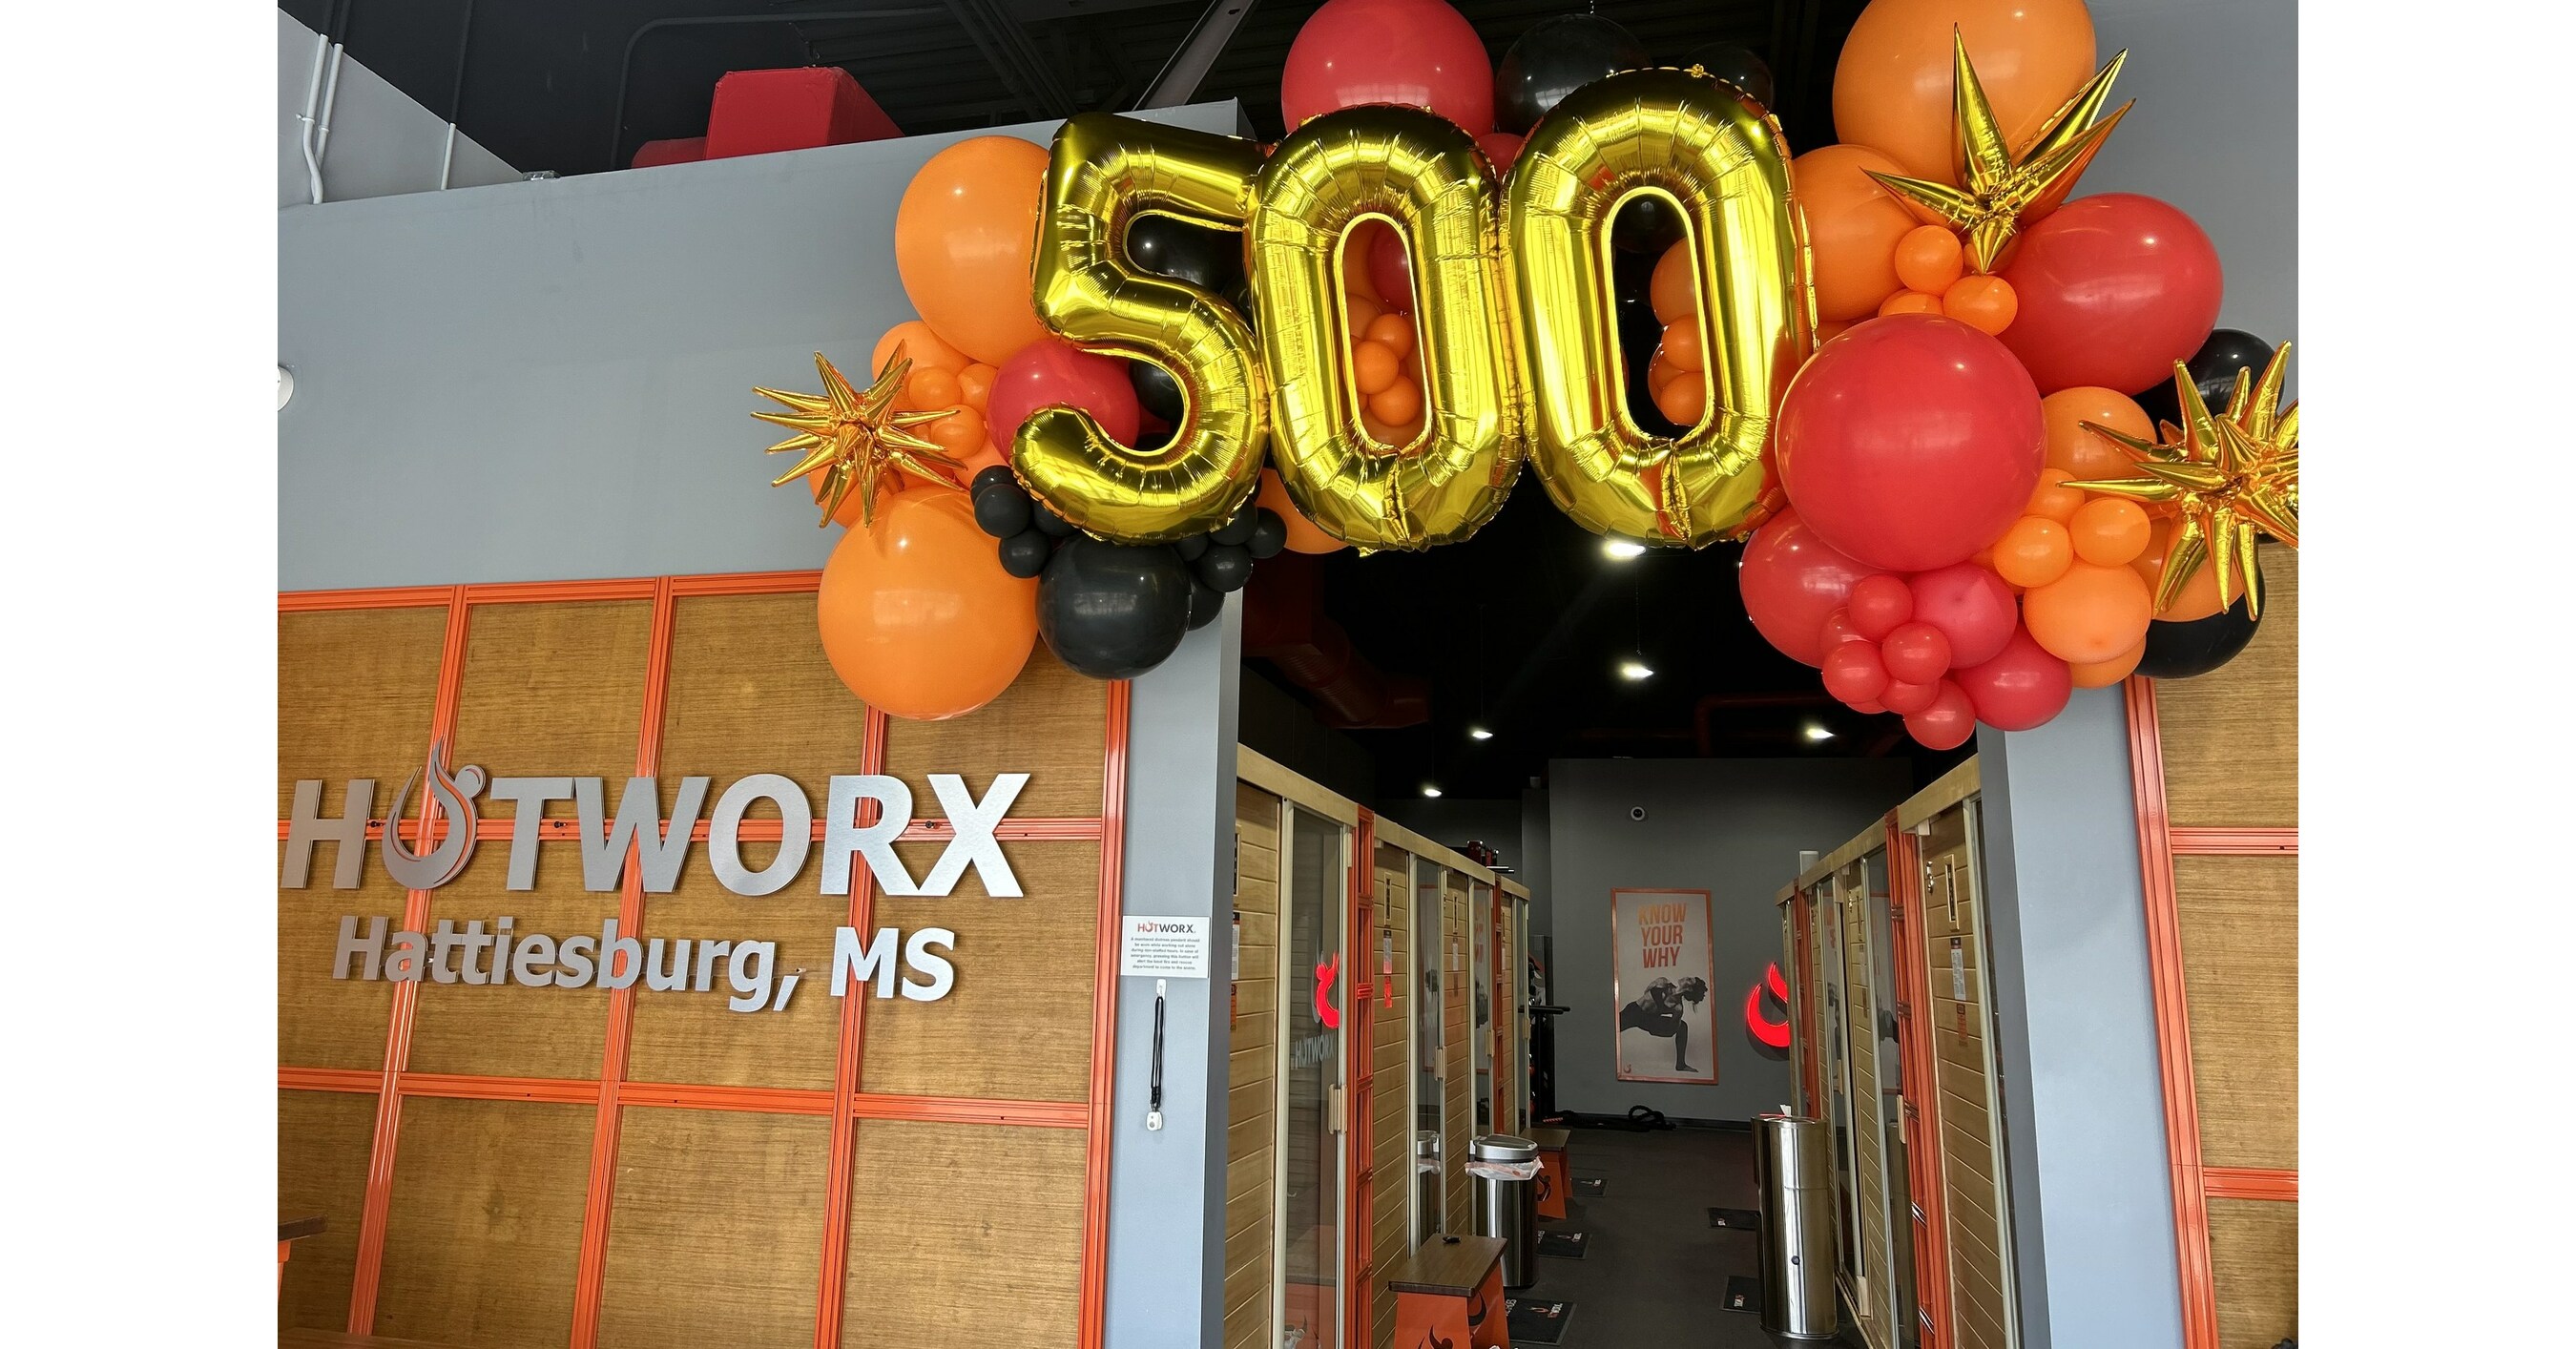 HOTWORX OPENS 500 FRANCHISE LOCATIONS IN 6 YEARS